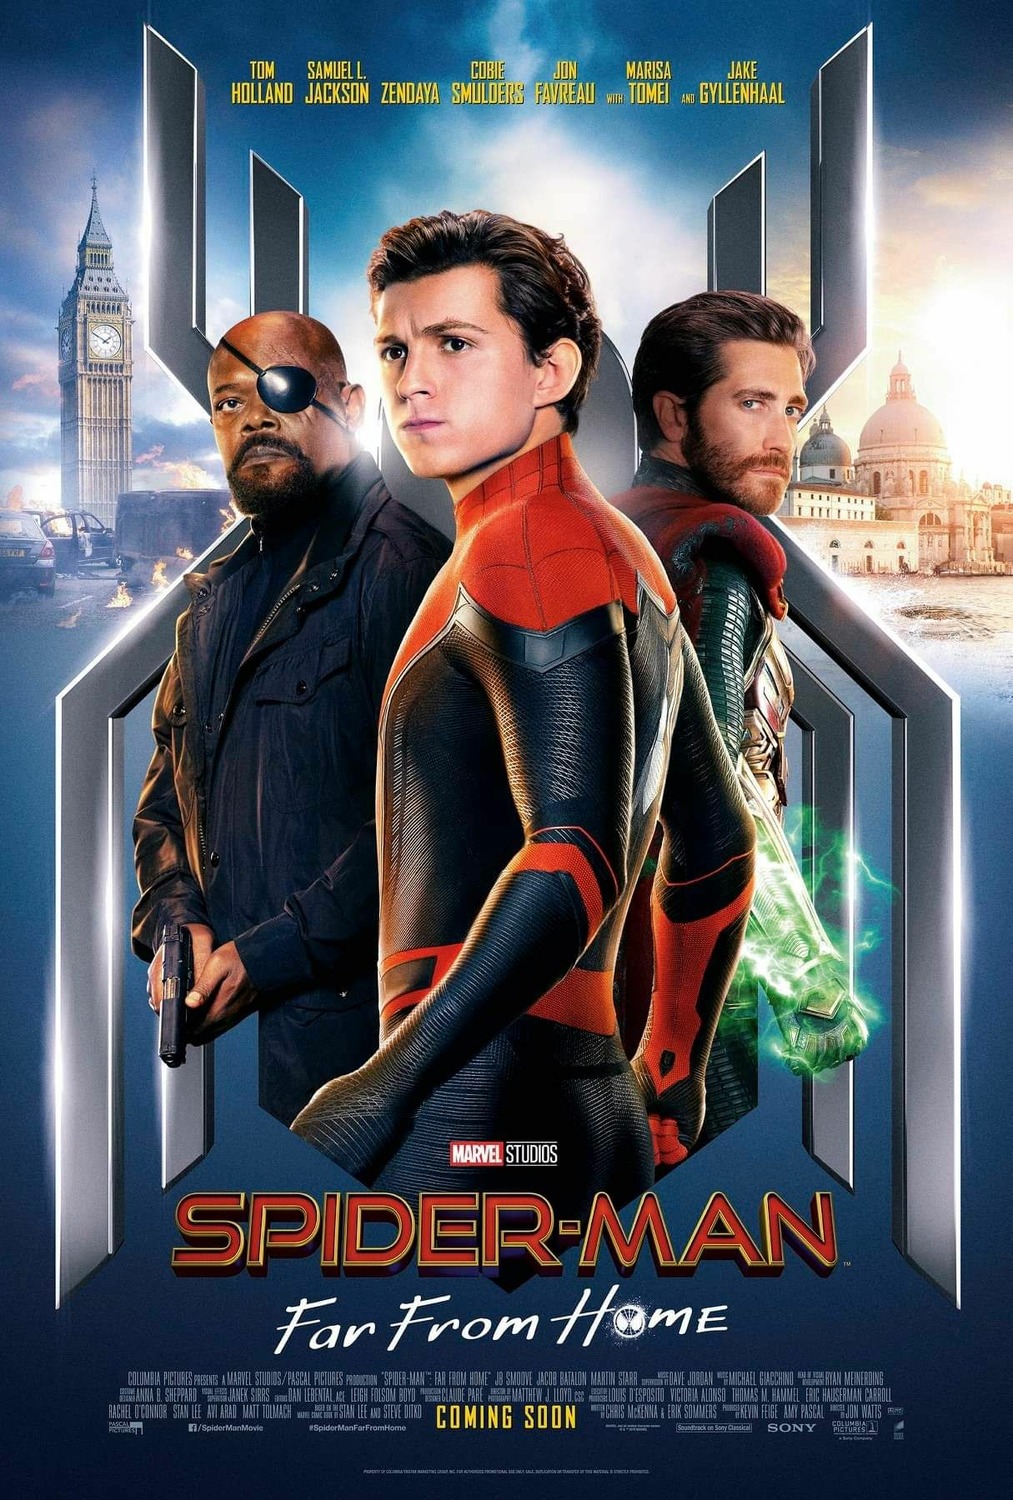 Spider-Man: Far From Home - Where you Watch - What Movies To Watch Before Spider-man: Far From Home